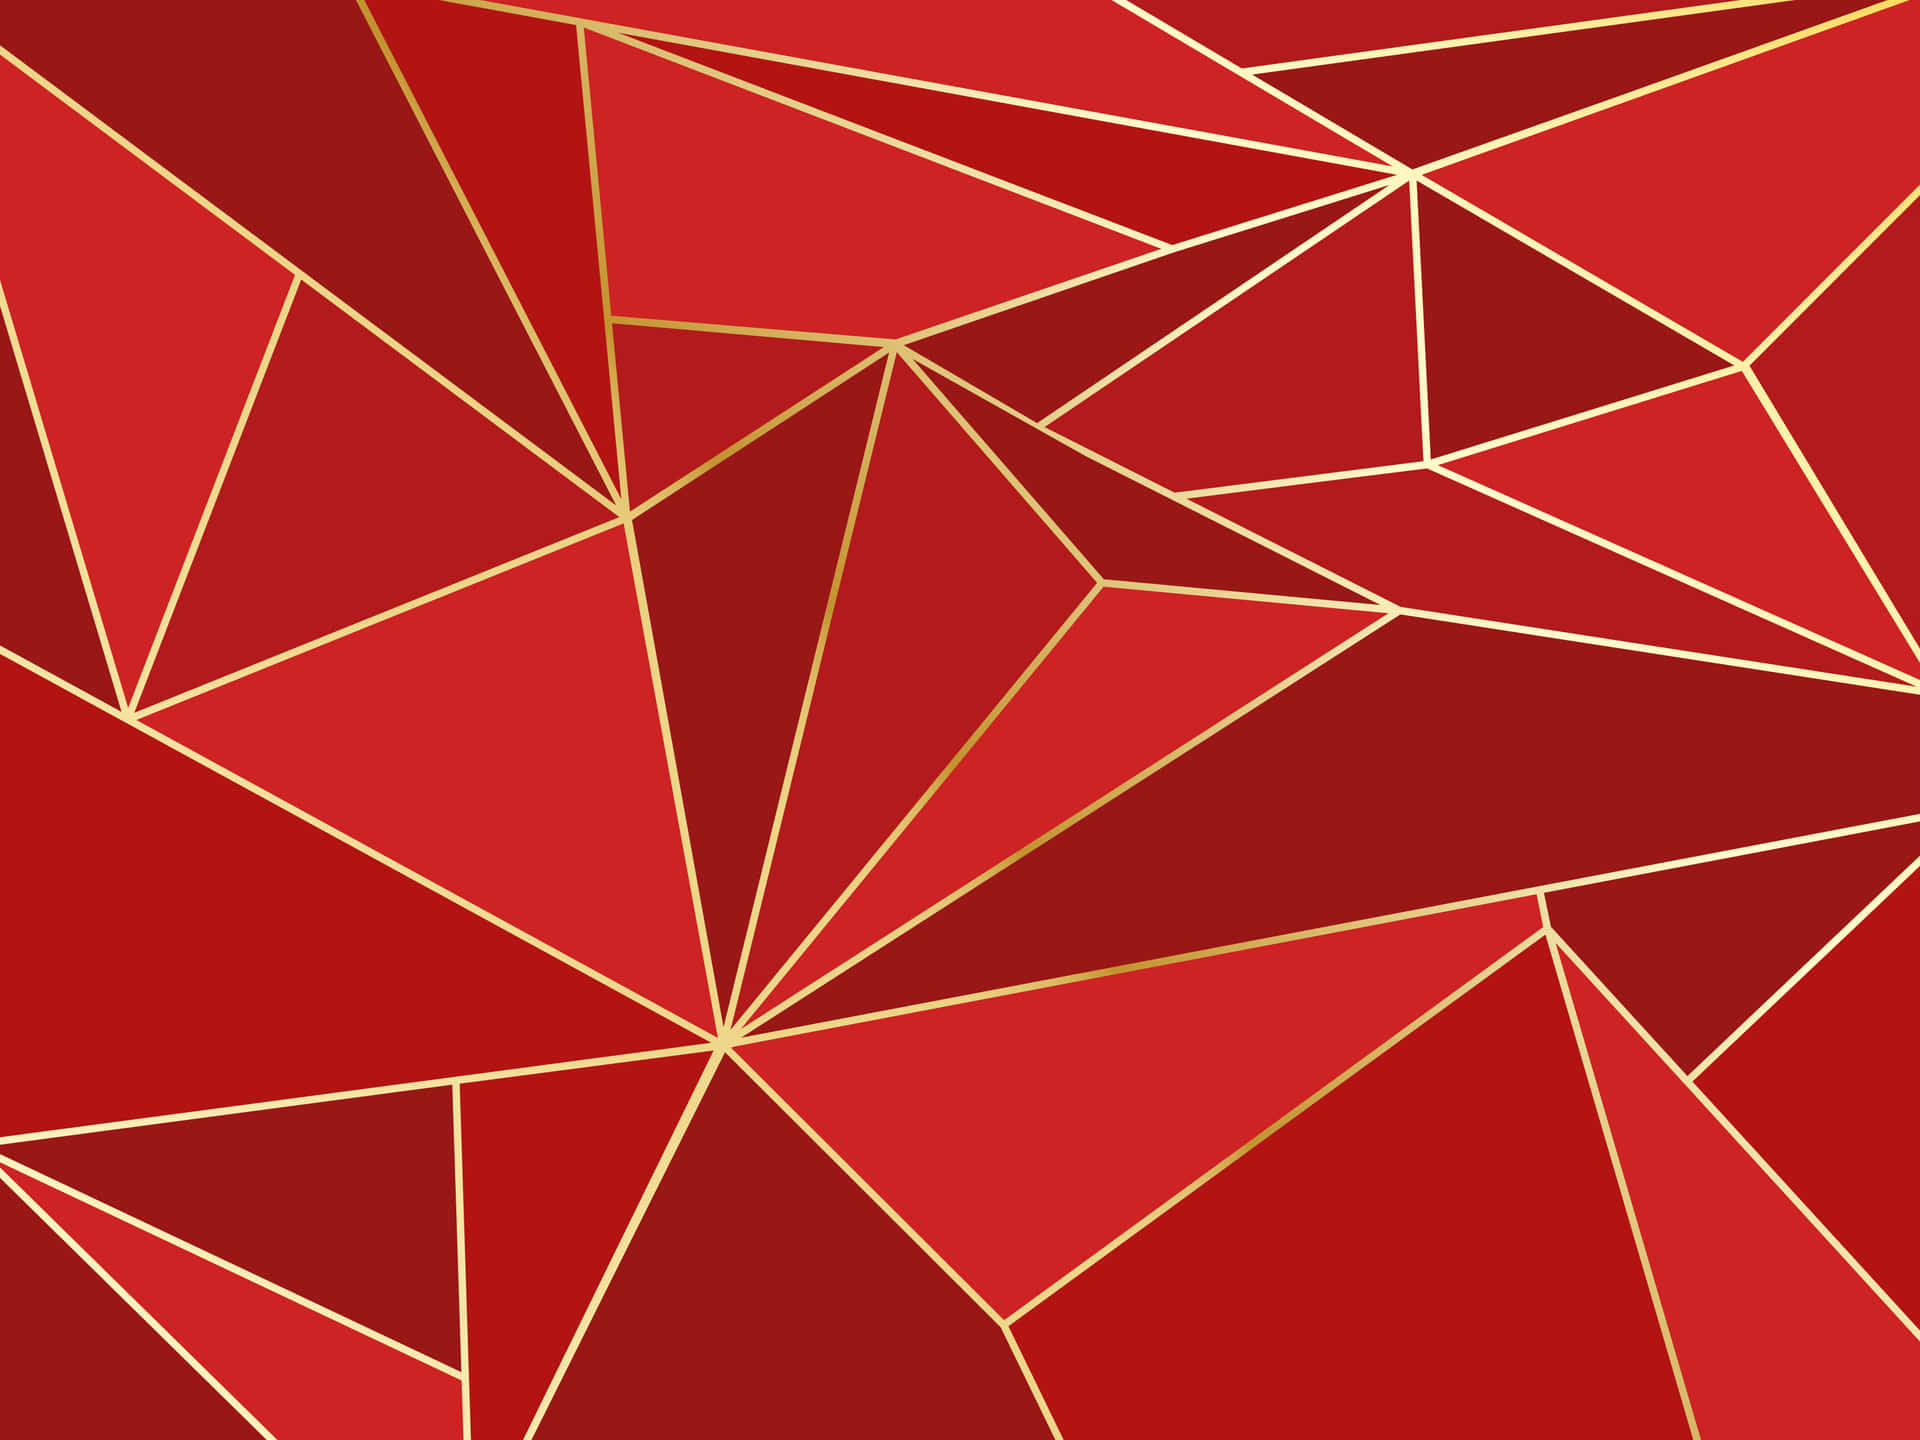 red and gold background images